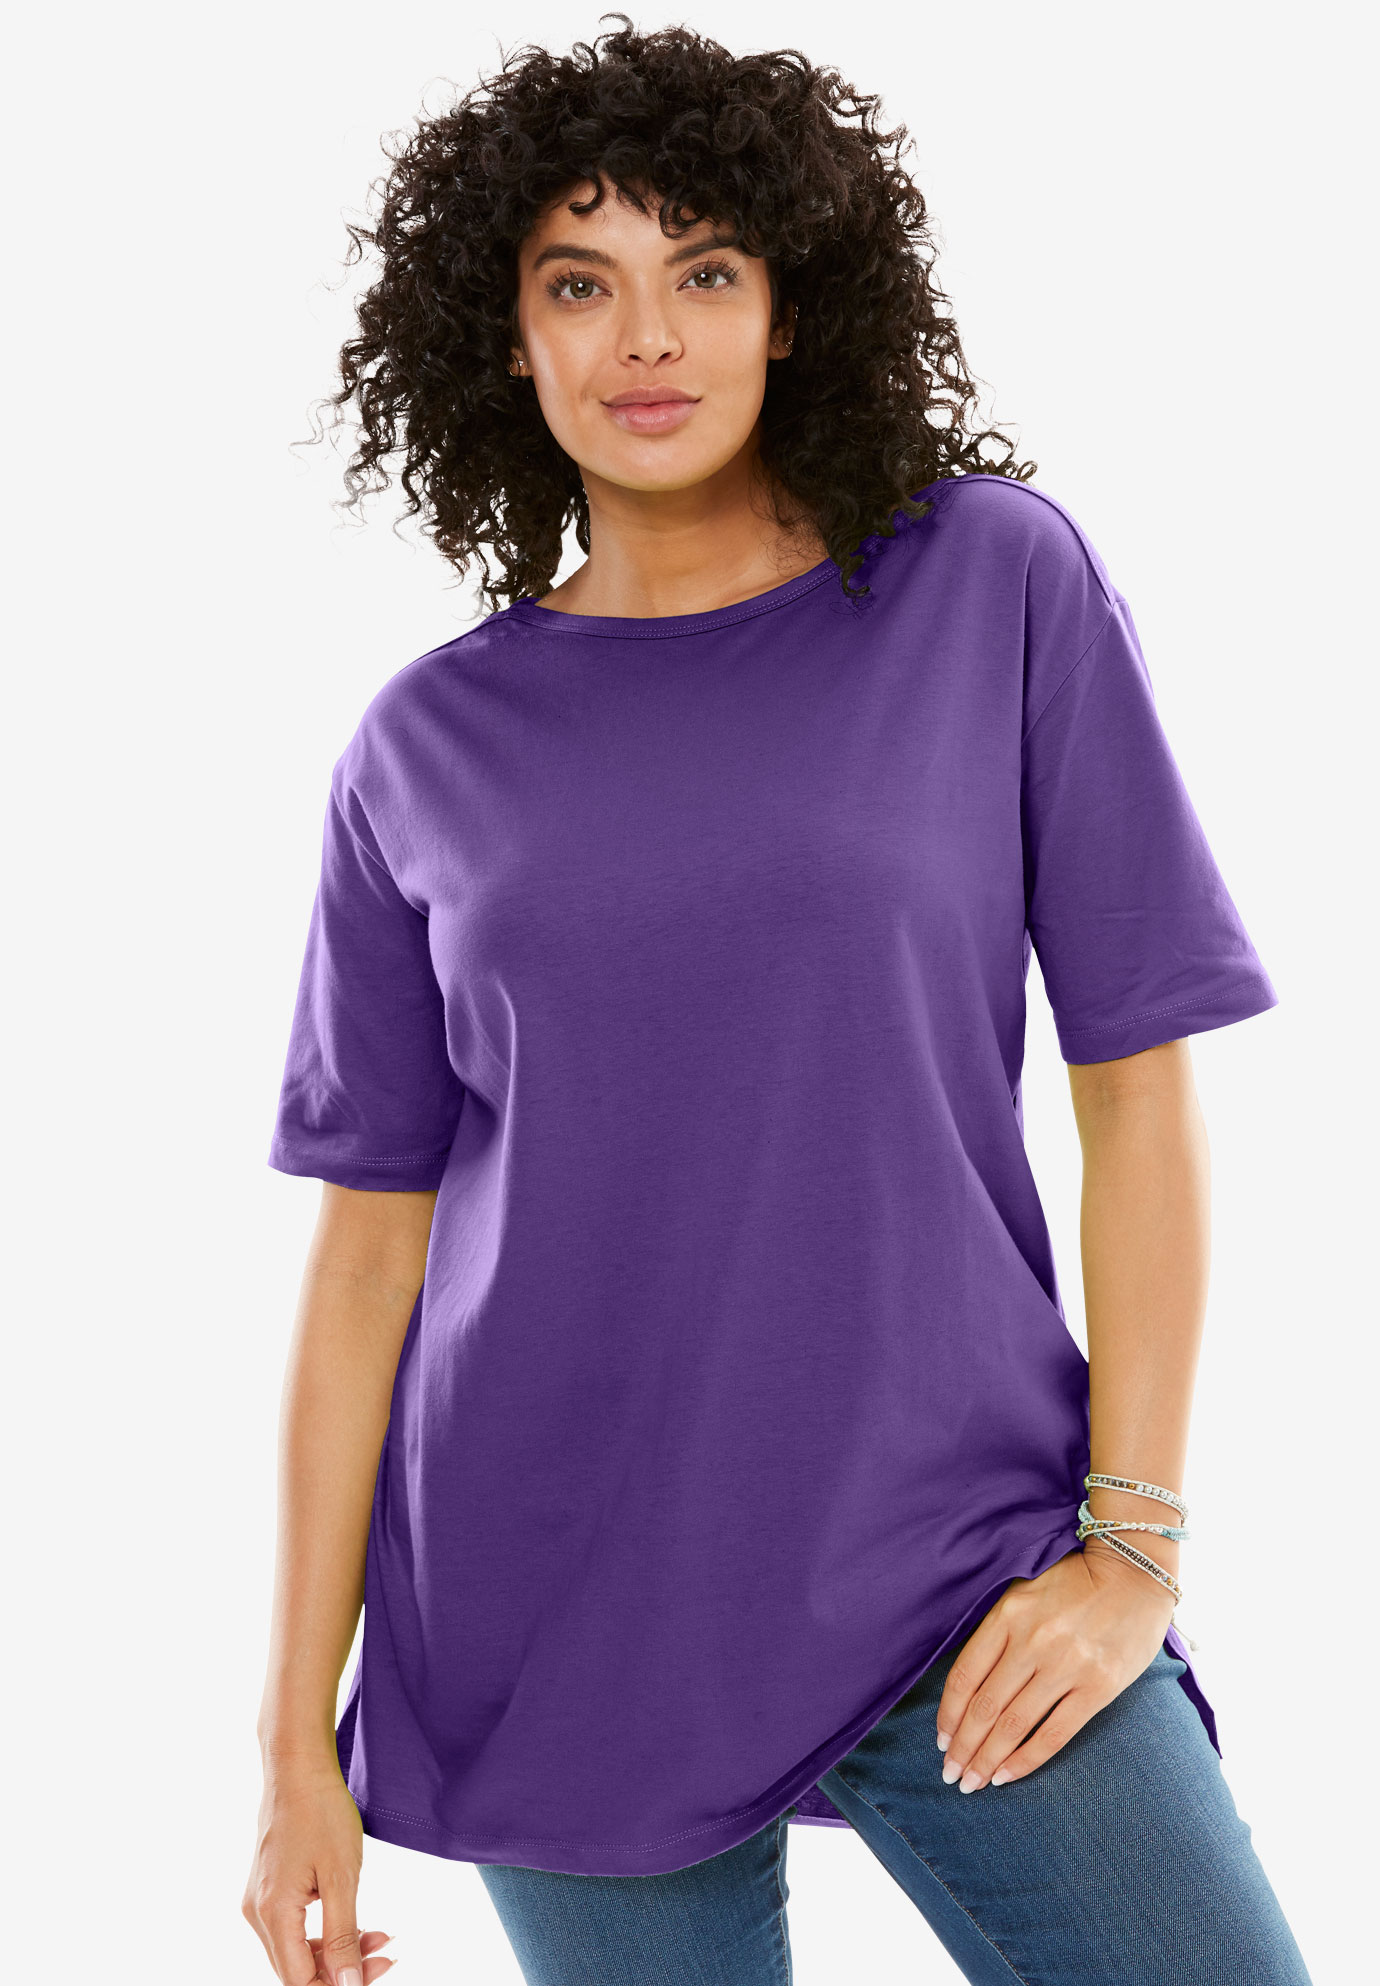 Perfect Boat Neck Tunic with Elbow-Length Sleeves | Plus Size T-Shirts ...